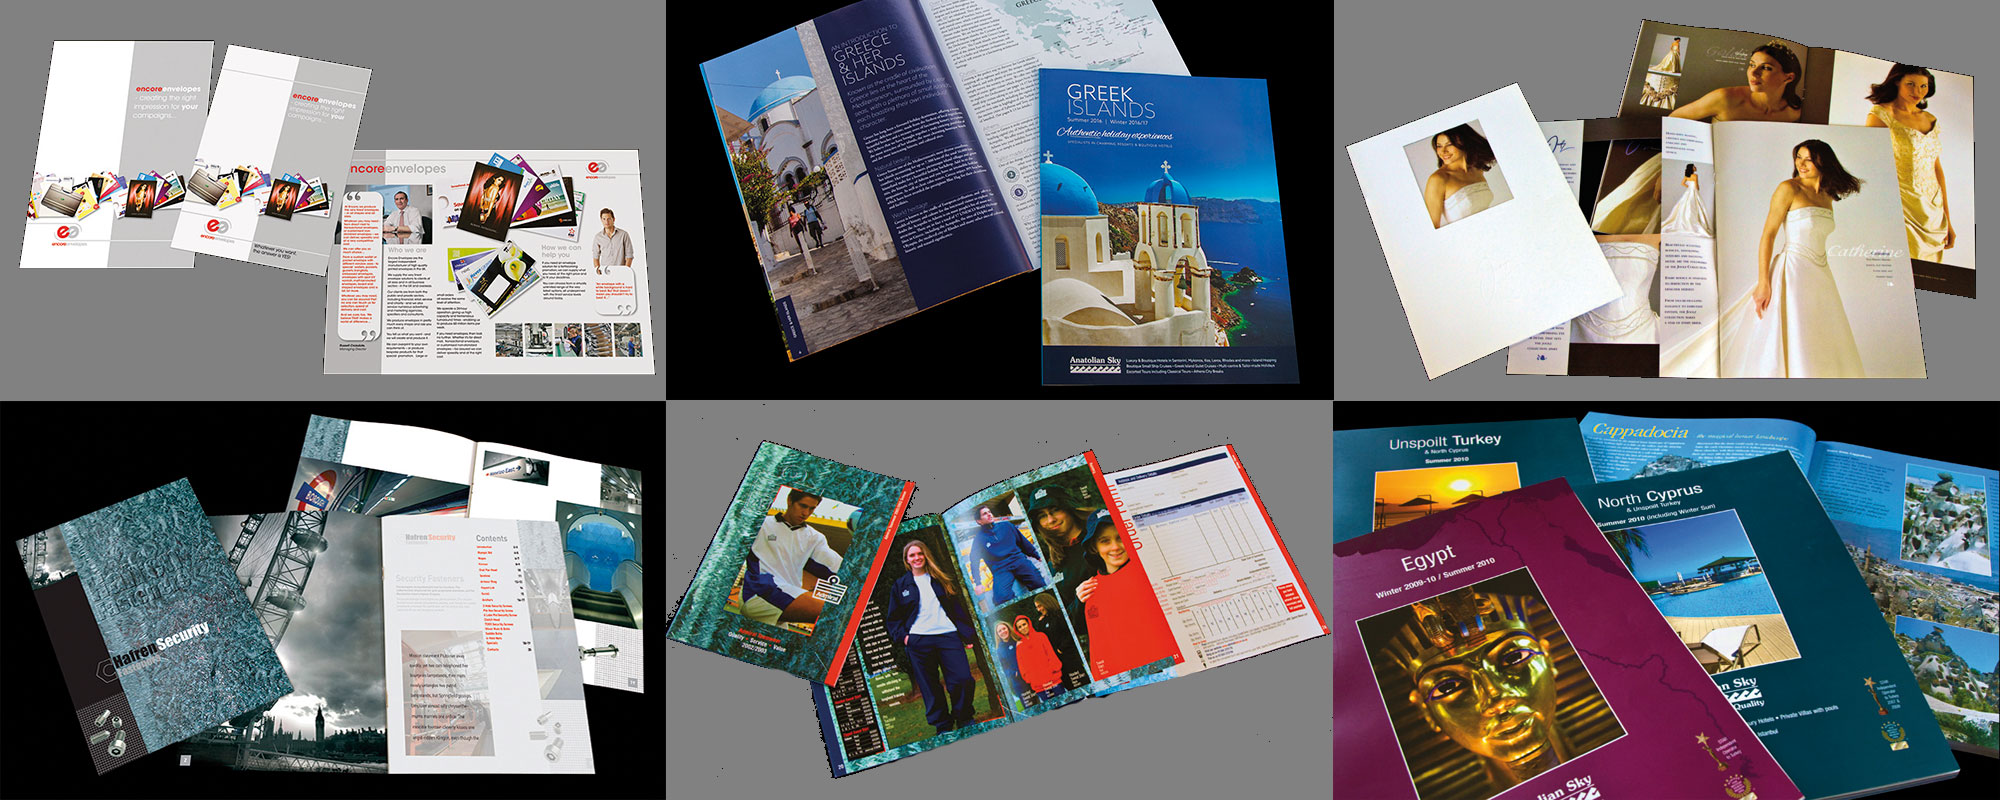 A selection of leaflets and brochures designed by Richard Blunt & Associates, specialist in design for print - experienced, creative, independent, autonomous, freelance graphic design consultancy in Hall Green, Birmingham, West Midlands © RichardBlunt-design.co.uk